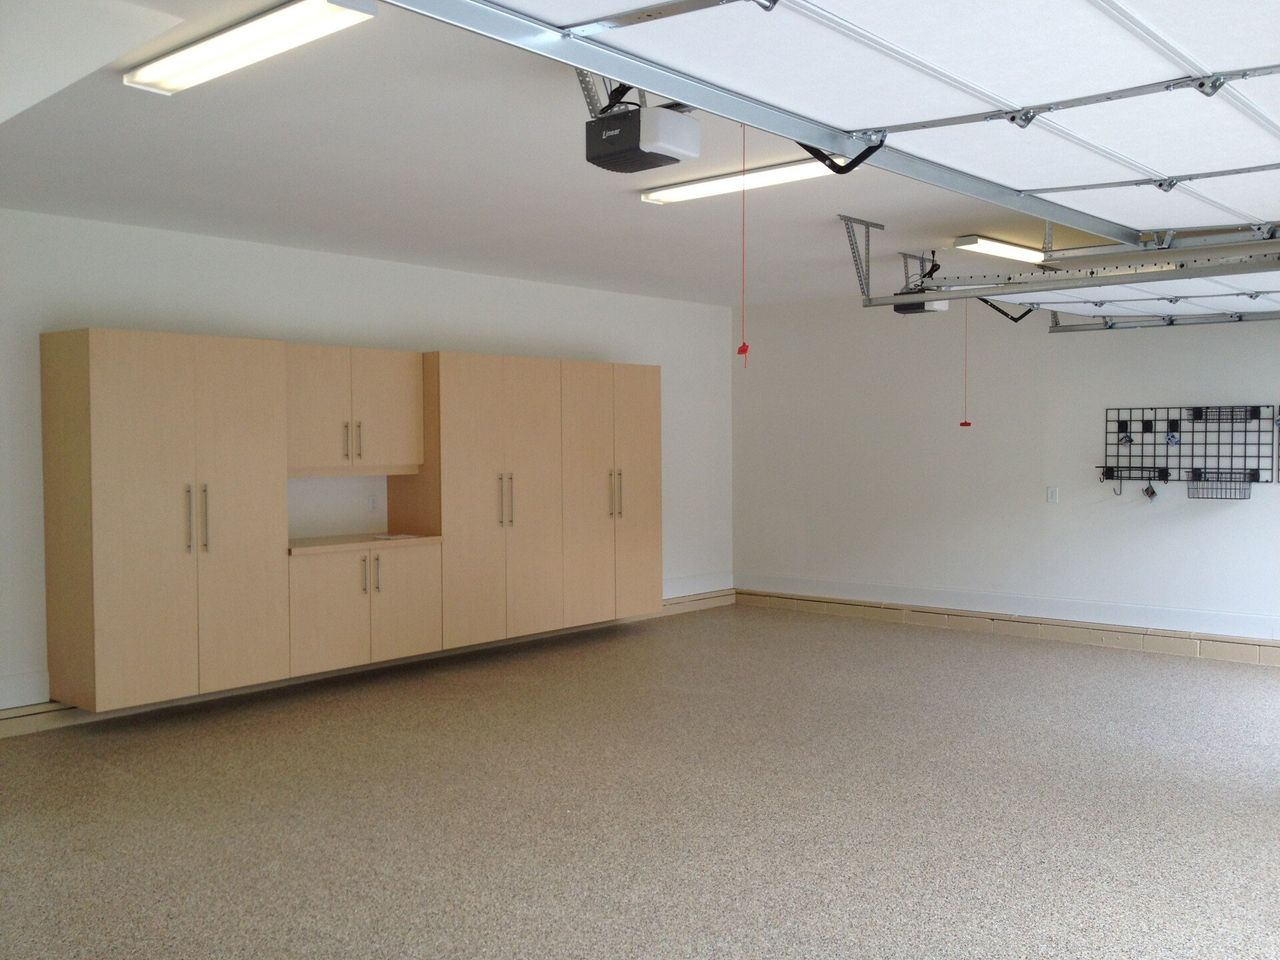 White floor coating and natural wood cabinet solutions in a garage.